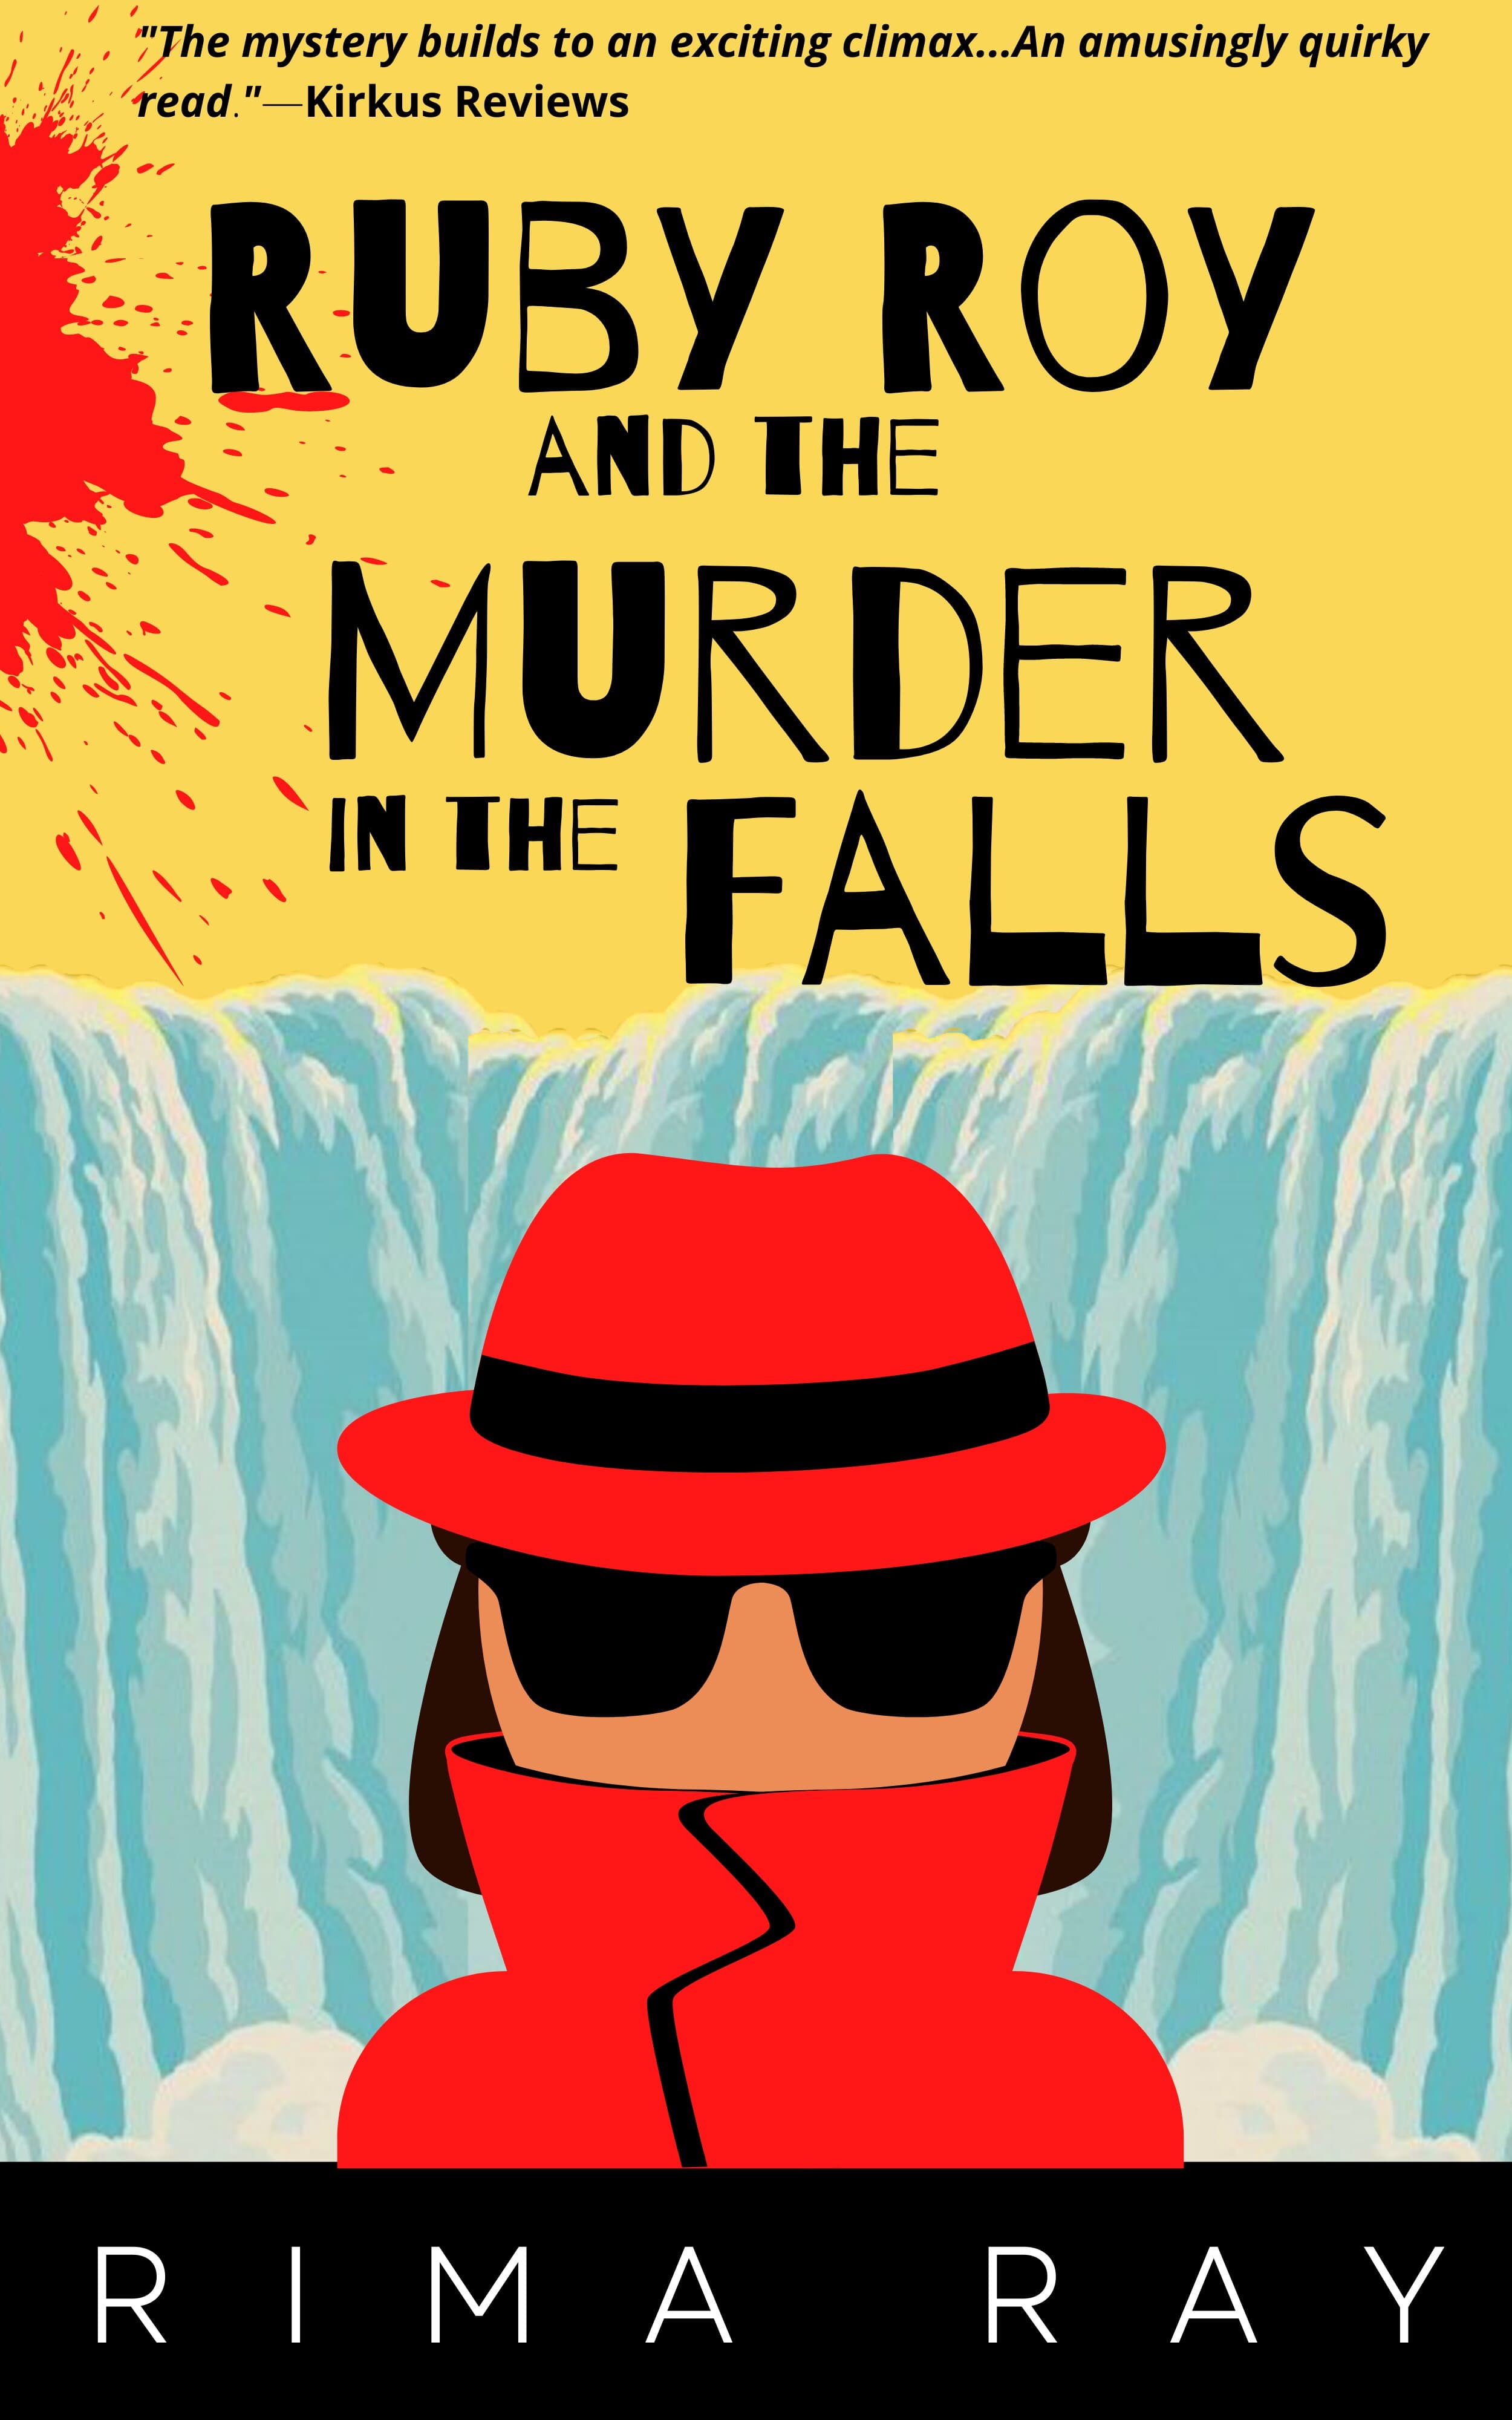 New novel "Ruby Roy and the Murder in the Falls" by Rima Ray is released, a fun-filled mystery about a professor thrown into her own real-life detective story